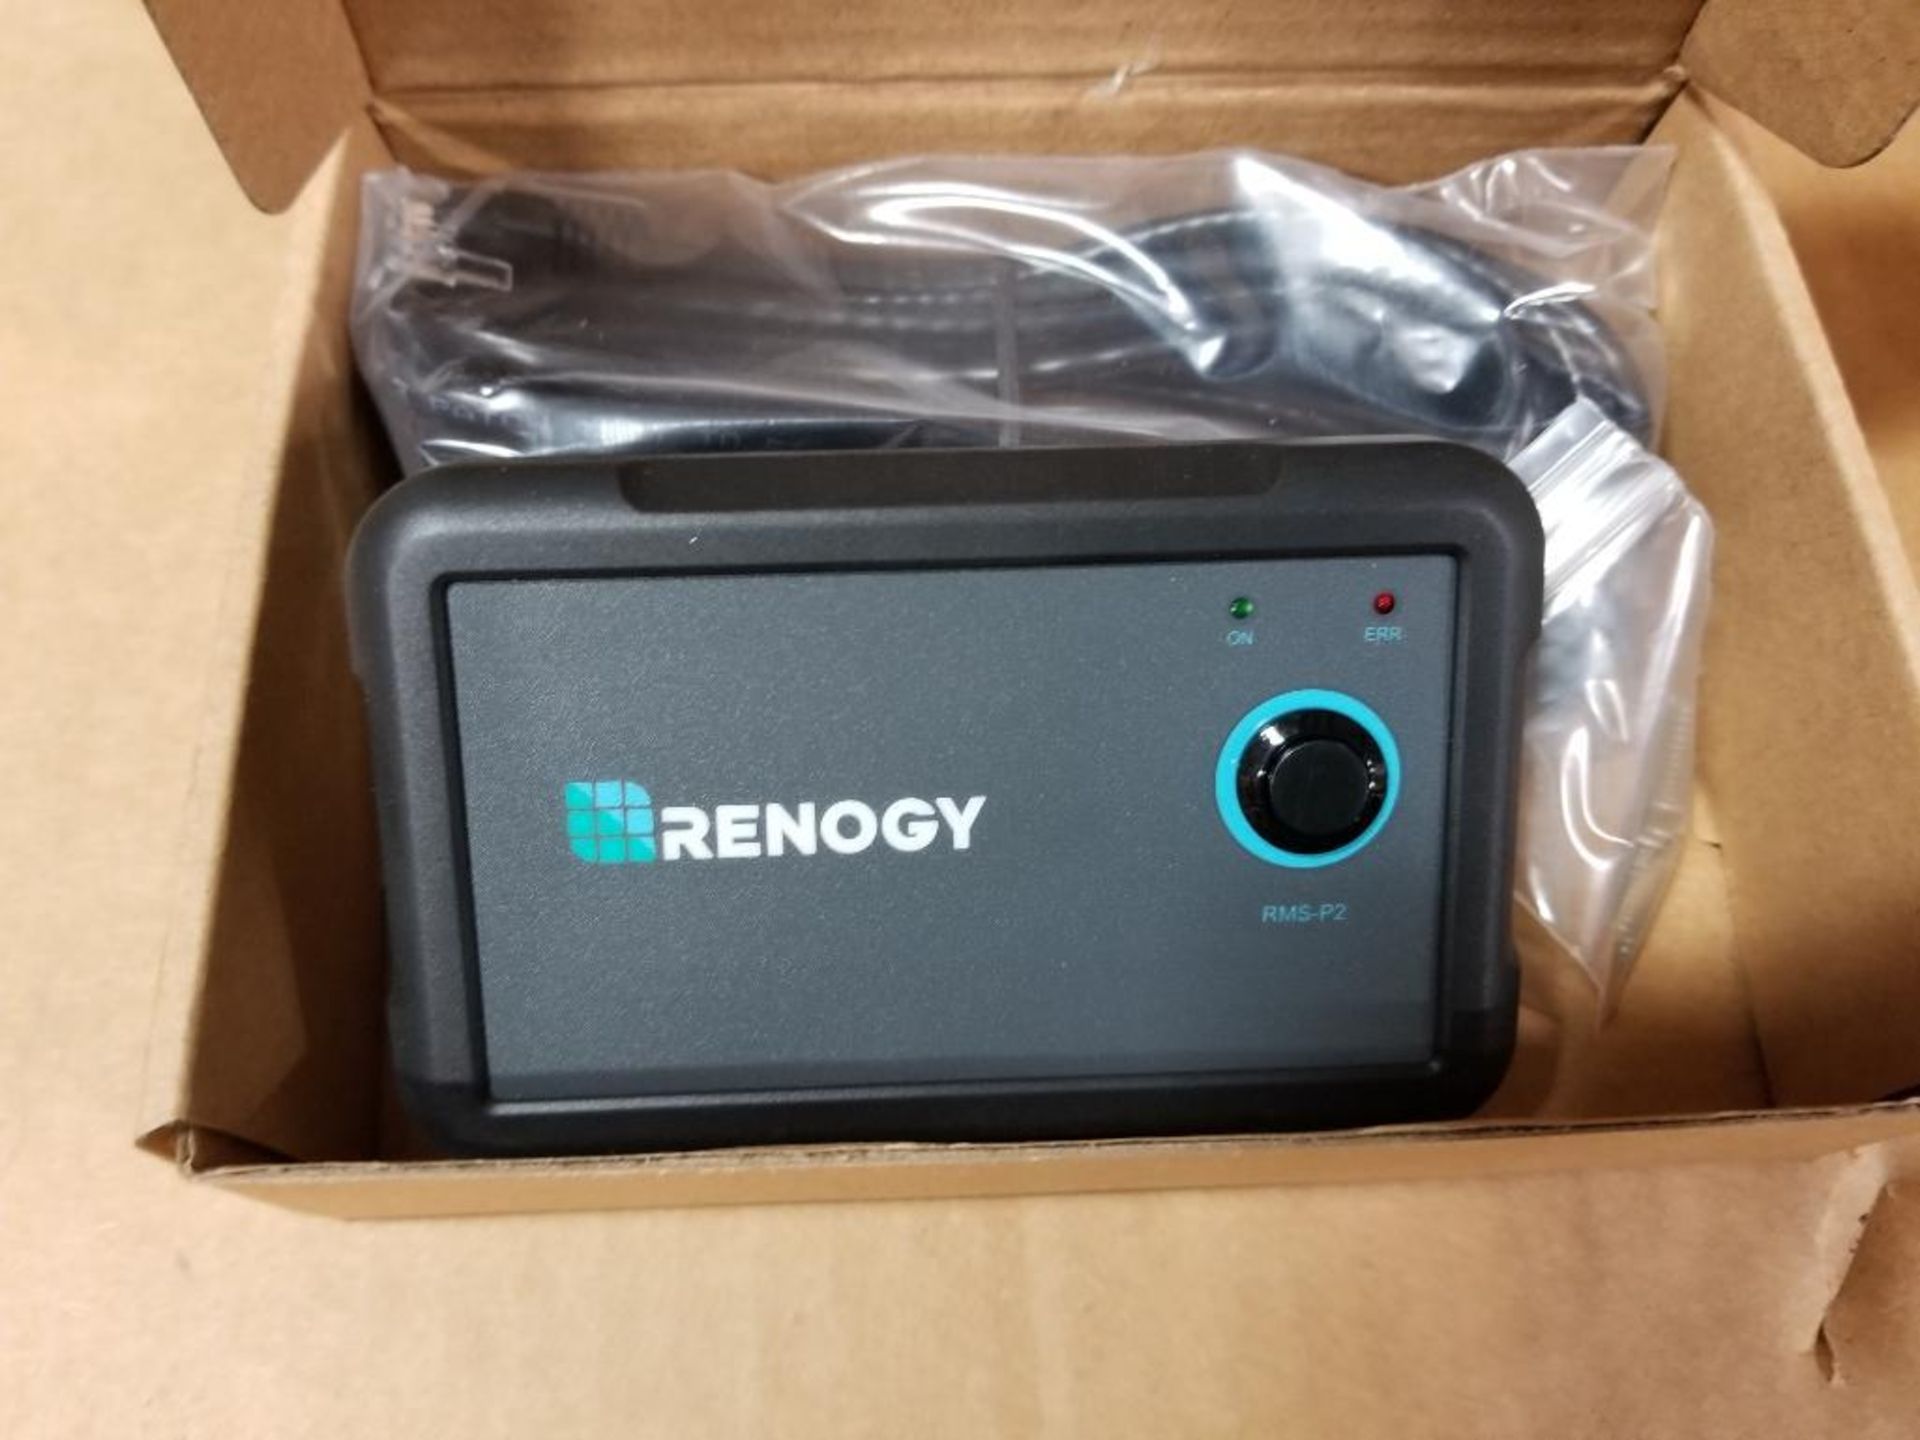 Qty 10 - Renogy RMS-P2 inverter charger. - Image 4 of 6